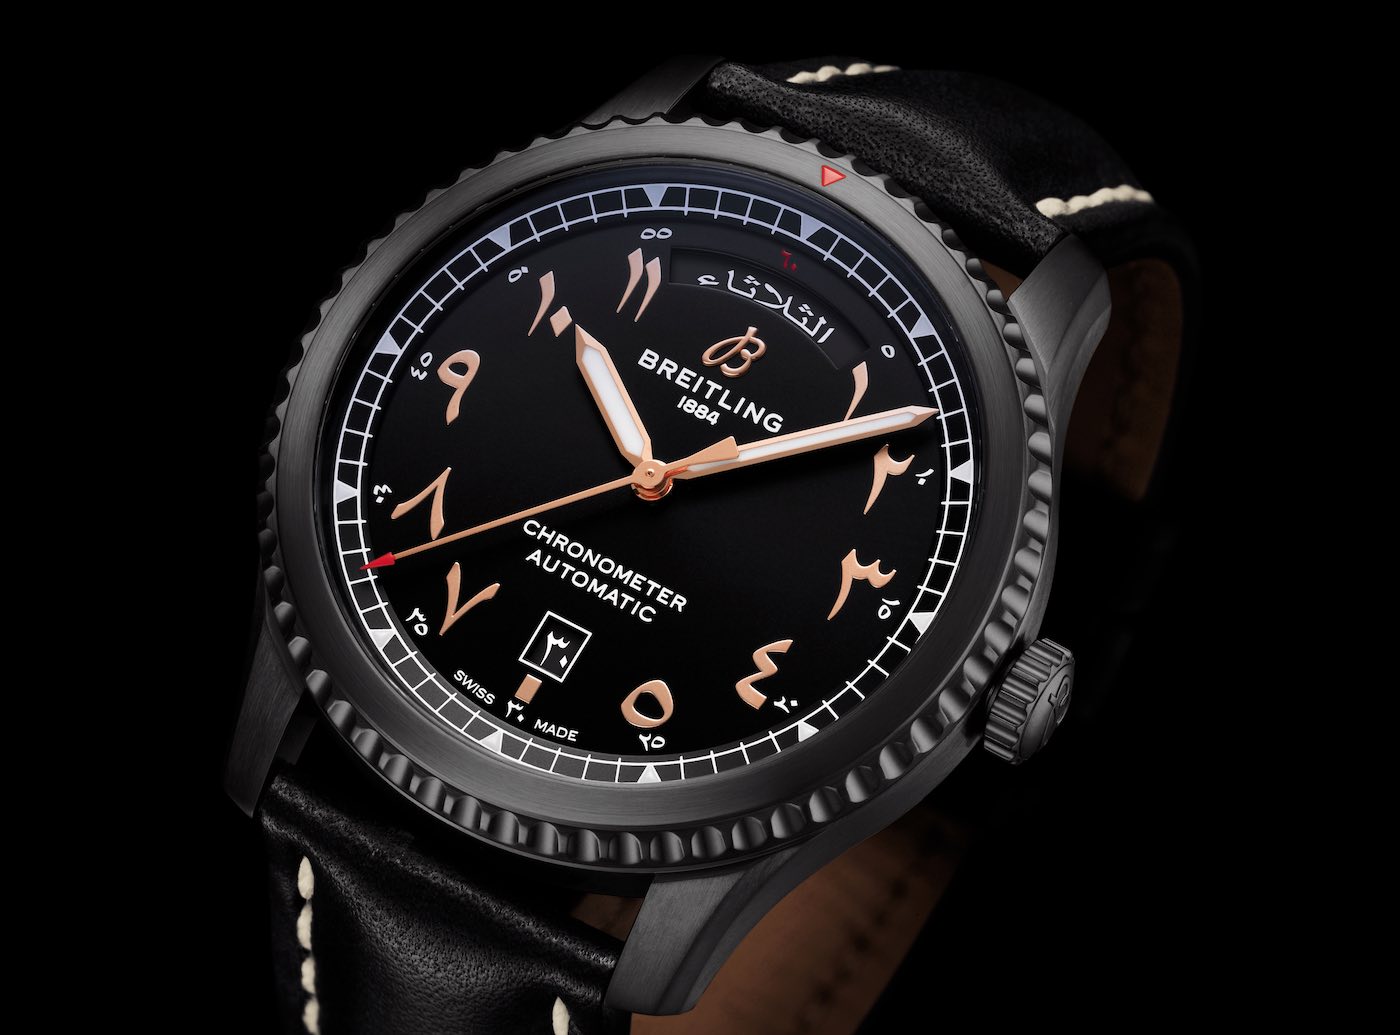 Breitling Launches New Aviator 8 Day & Date 41 Etihad Airways Limited Edition Watch